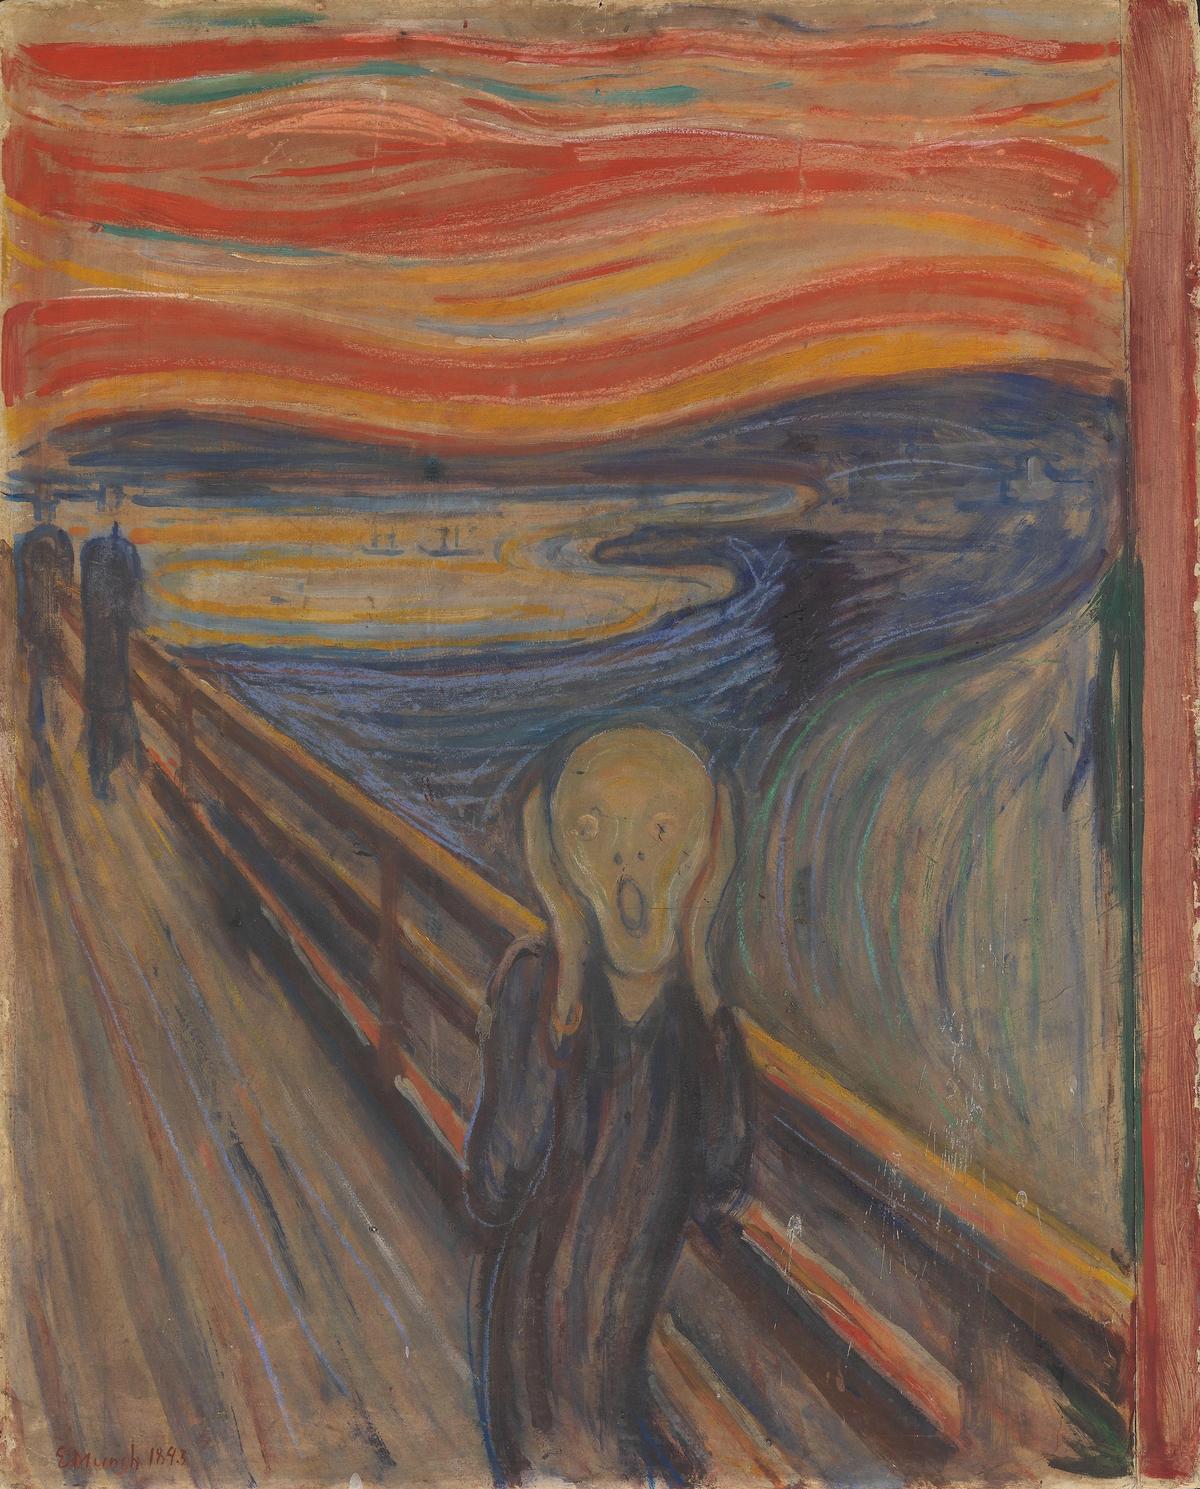 Edvard Munch's The Scream (1893) has an inscription in the top left corner Photo: Borre Hostland. Courtesy of the National Museum of Norway